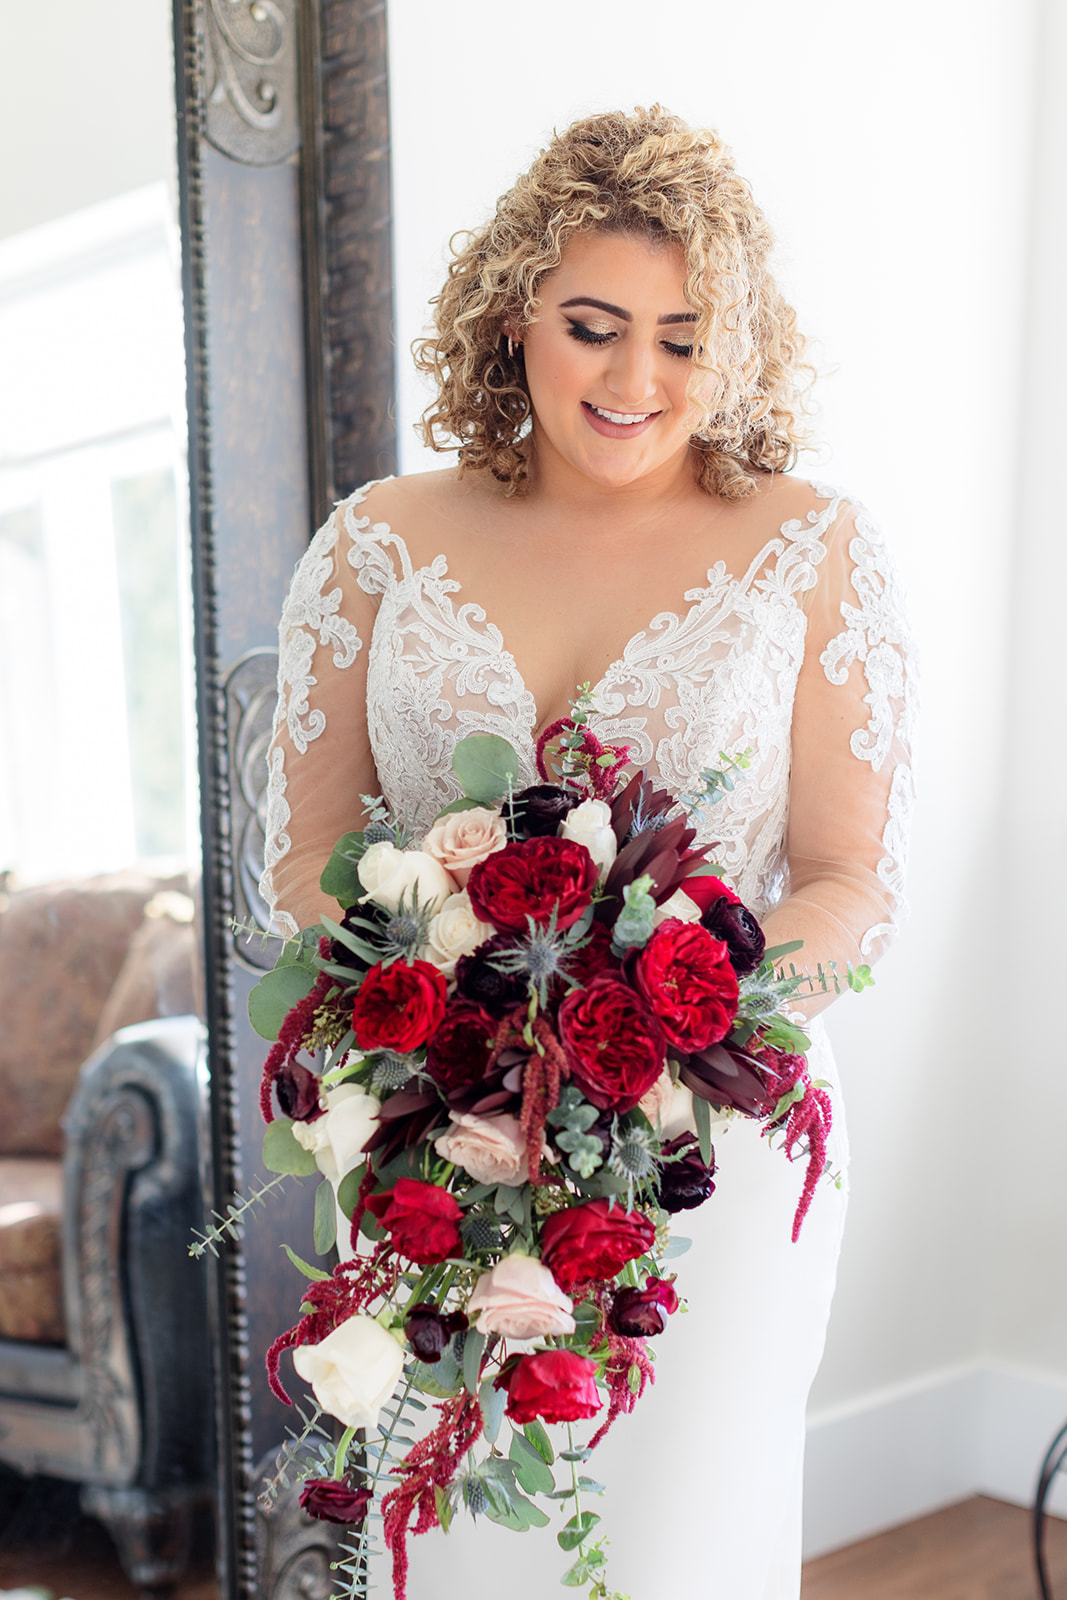 A bride smiles down to her large red bouquet in her hands while standing in the getting ready room